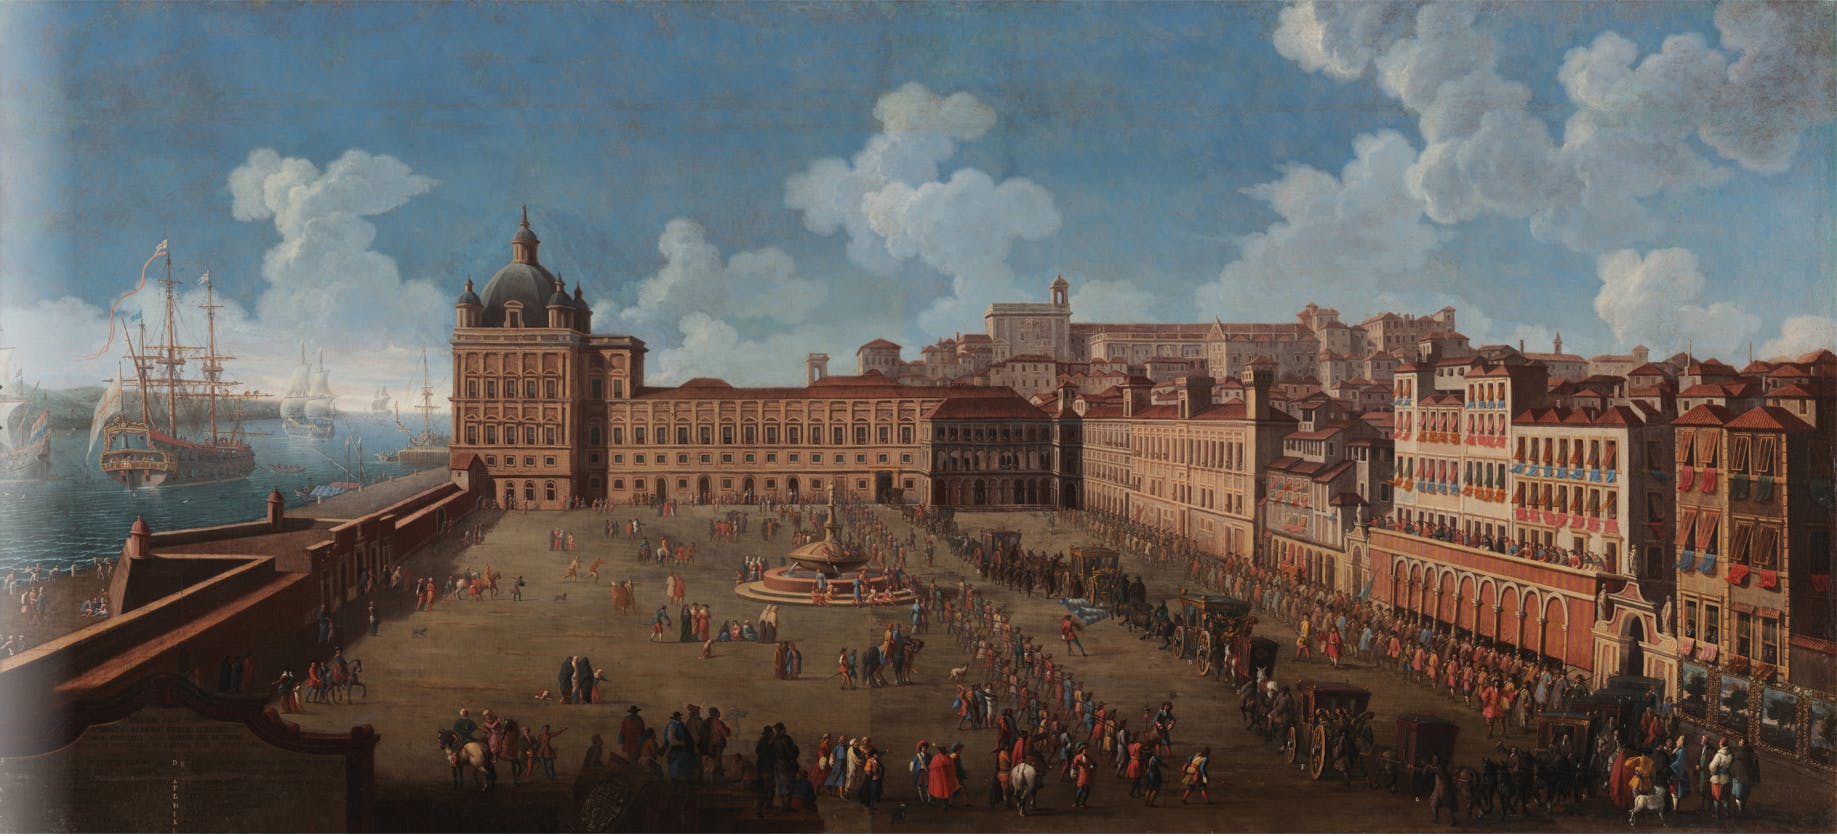 Entrance Procession into Lisbon by Monsignor Giorgio Cornaro The Entrance Procession into Lisbon by Monsignor Giorgio Cornaro in 1693, unknown artist, 17th century, Painting © Museu Nacional dos Coches / DGPC